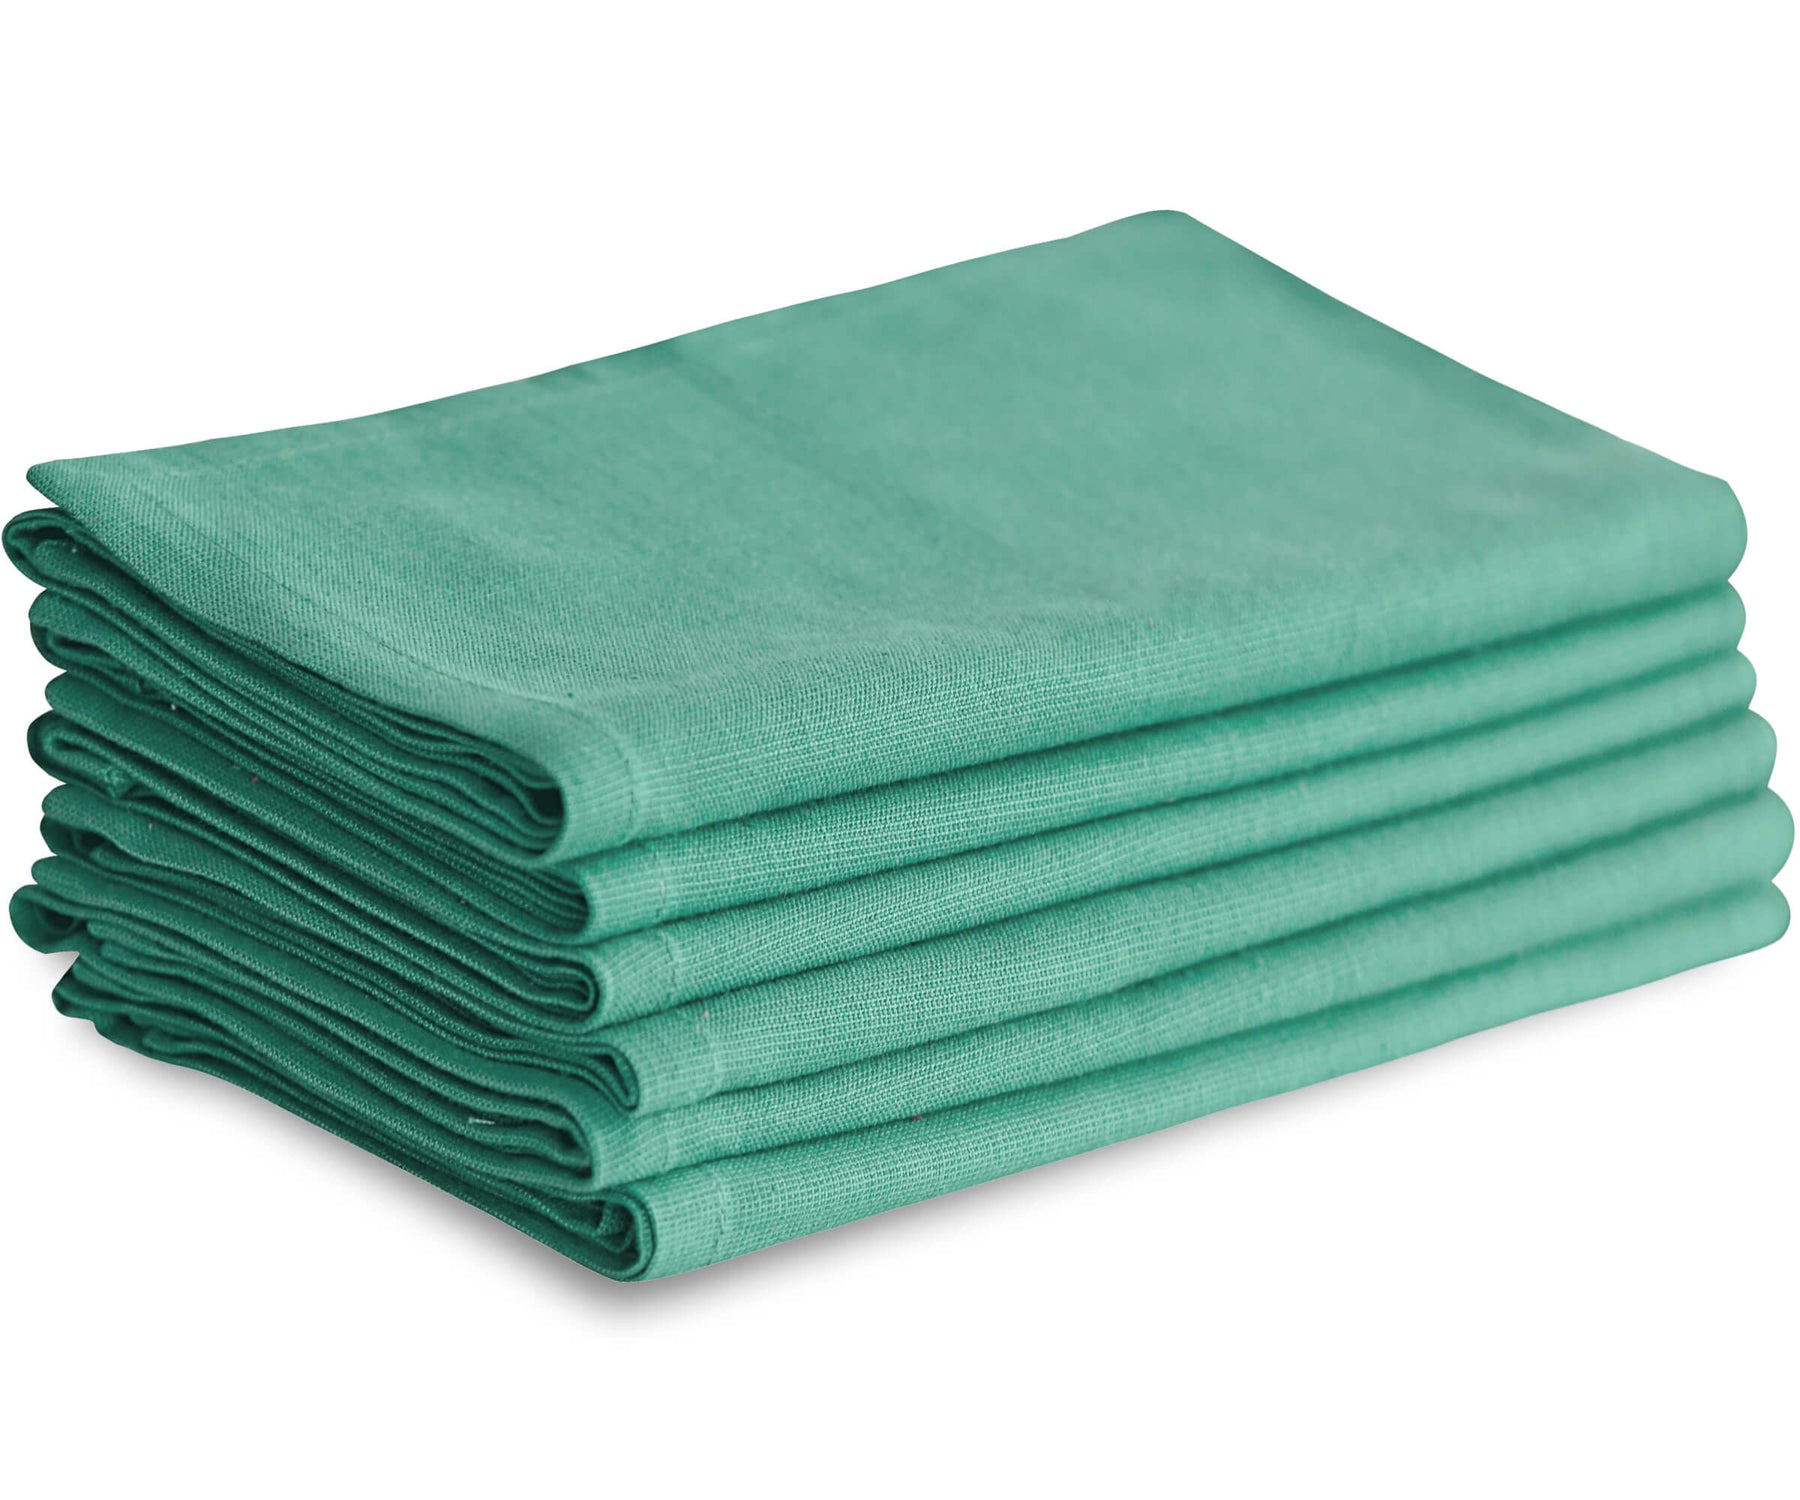 teal color dinner napkins of size 20×20" are woven with cotton, cloth napkins set of 6 are perfect for kitchen use